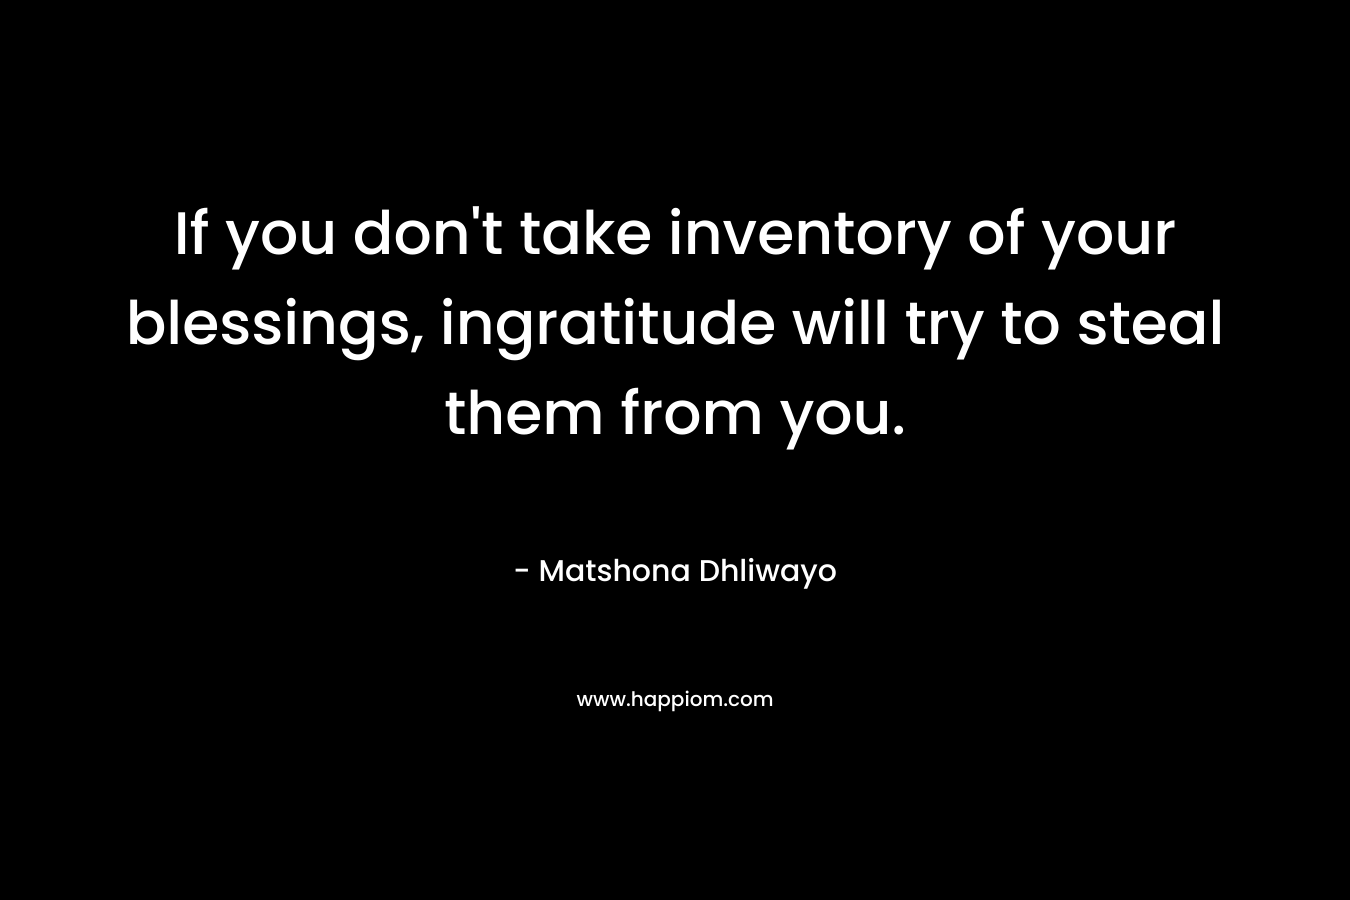 If you don't take inventory of your blessings, ingratitude will try to steal them from you.